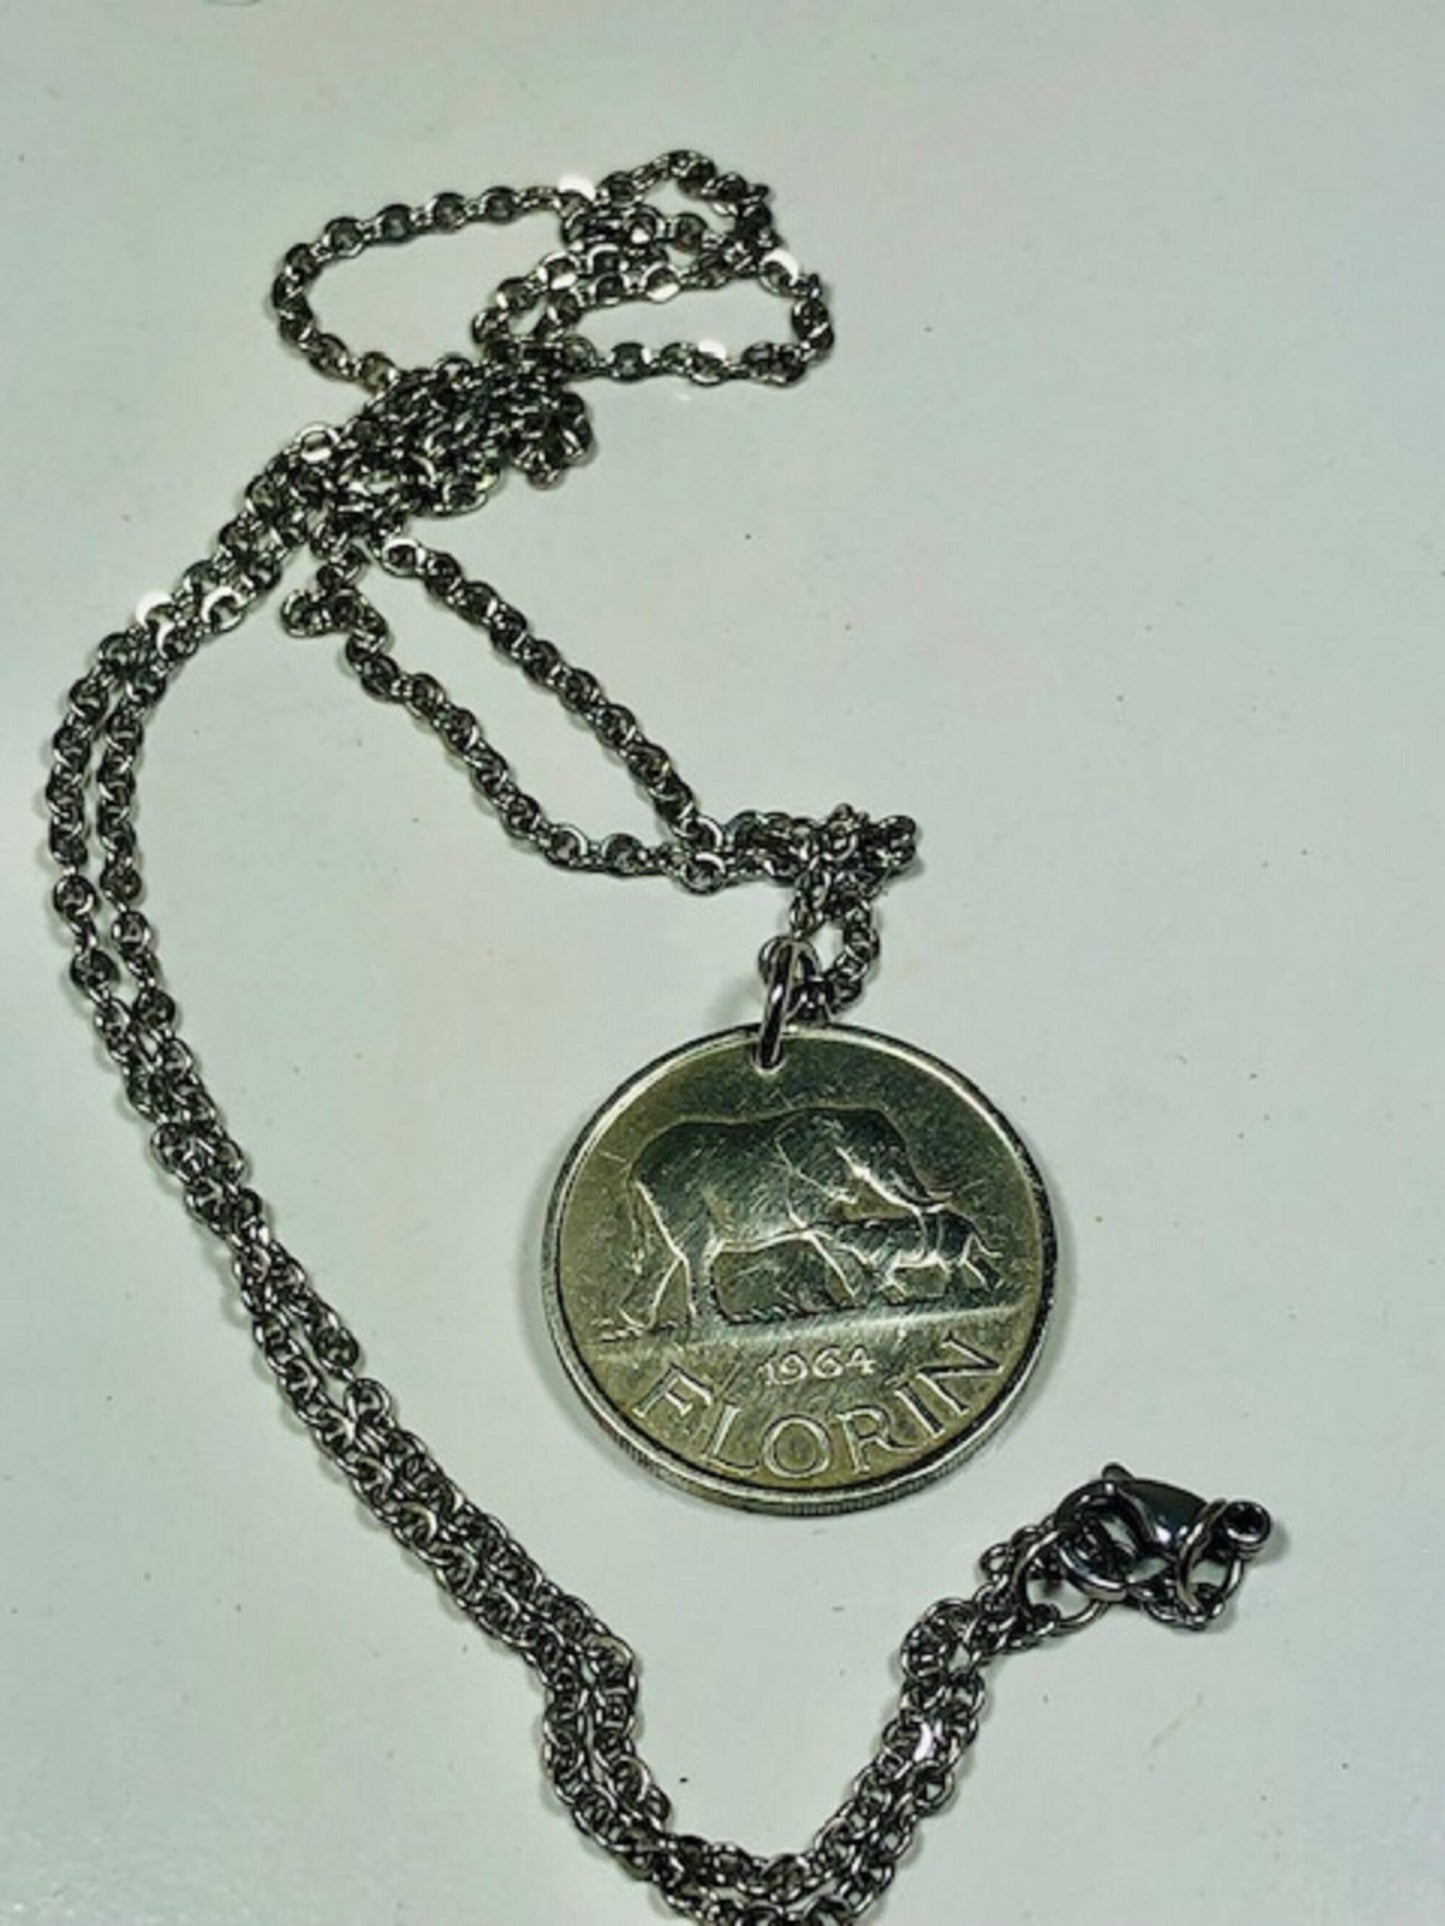 Malawi Coin Necklace 1 Florin 50 Cents African Elephant Calf Personal Handmade Jewelry Gift Friend Charm For Him Her World Coin Collector